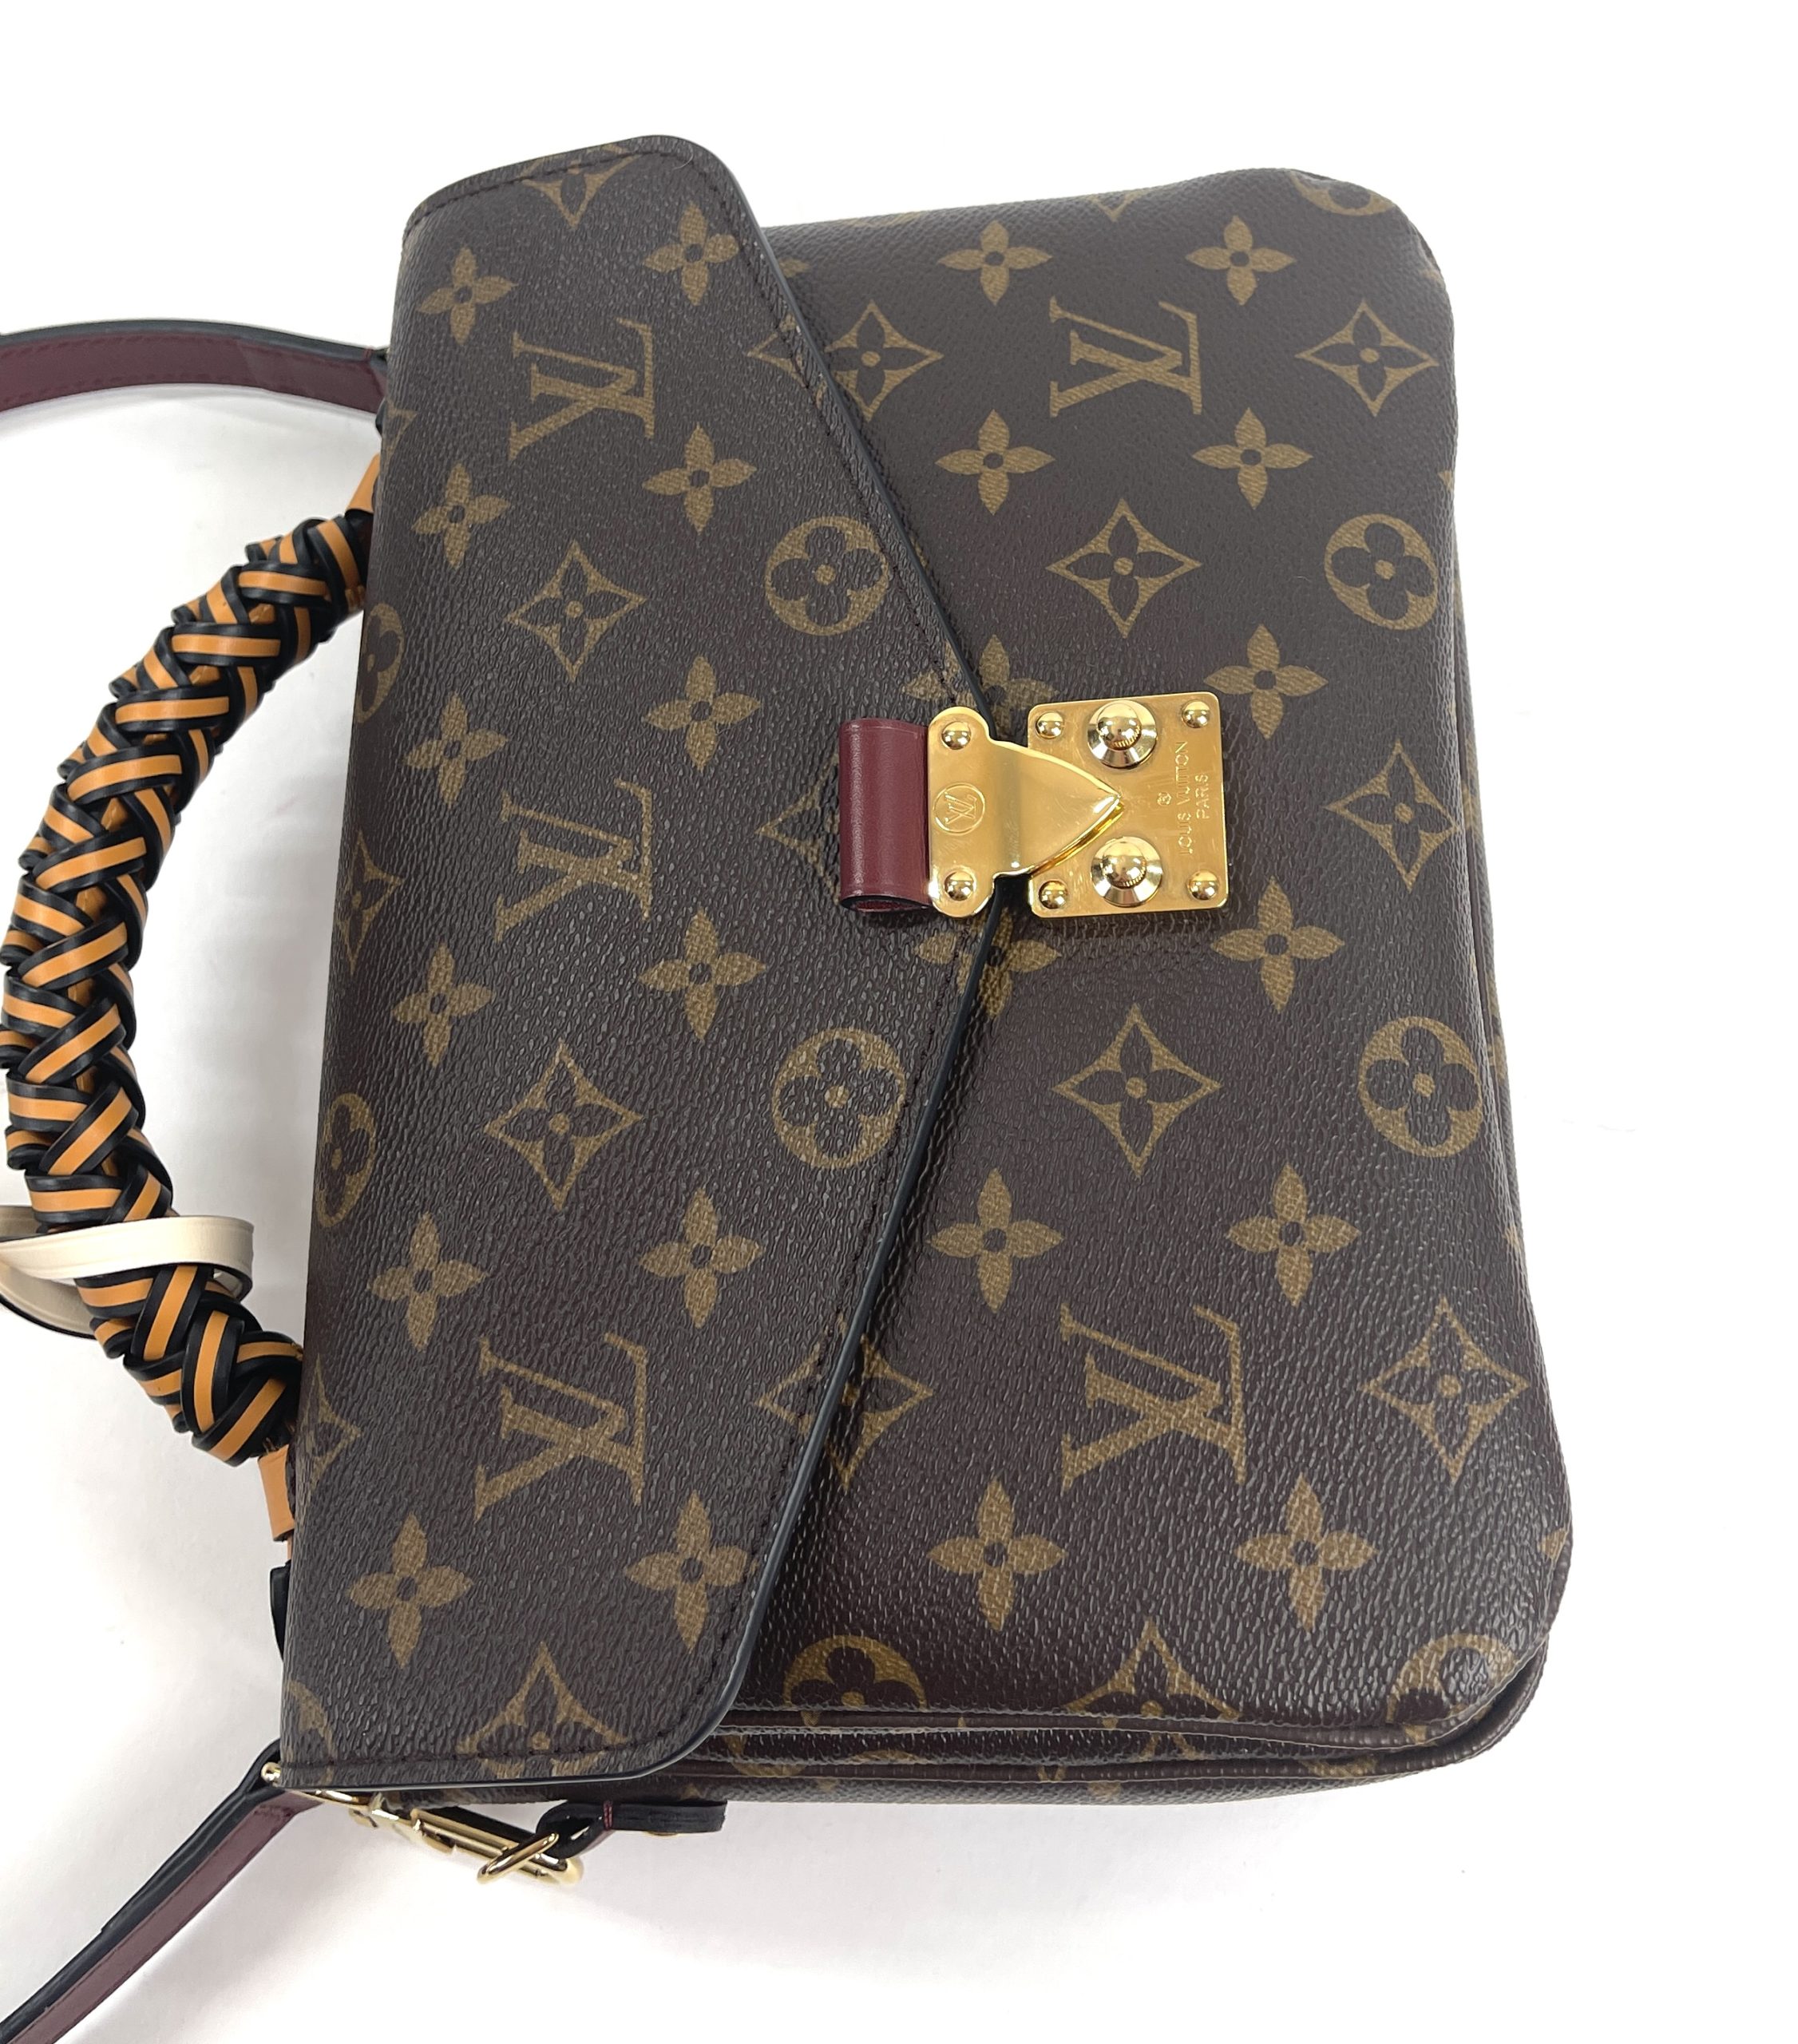 LOUIS VUITTON METIS BRAIDED HANDLE LIMITED EDITION, Luxury, Bags